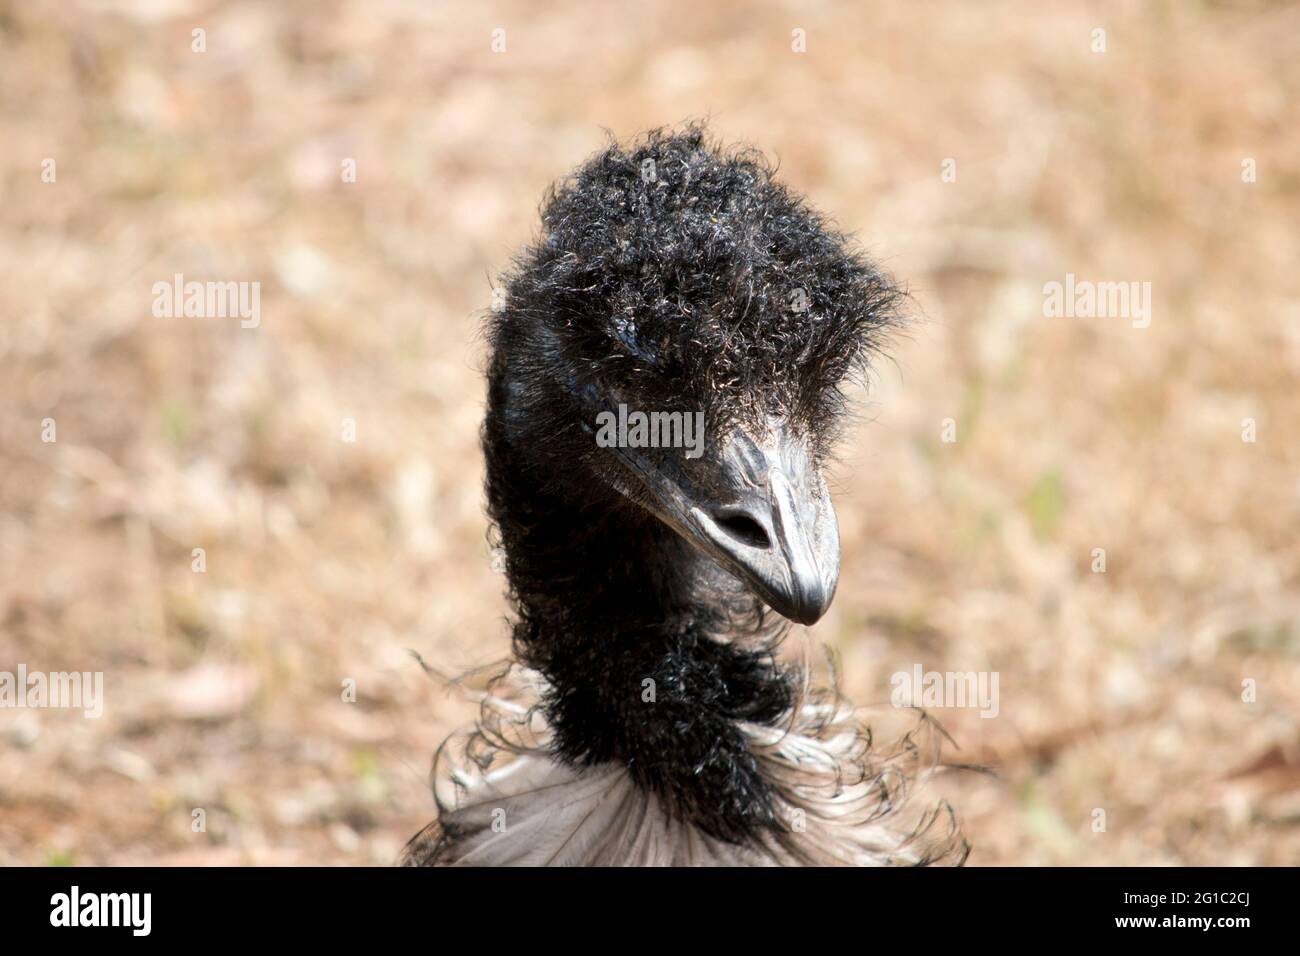 the Australian emu is a tall flightless bird with long feathers on its body.  It has black feathers on its neck and head Stock Photo